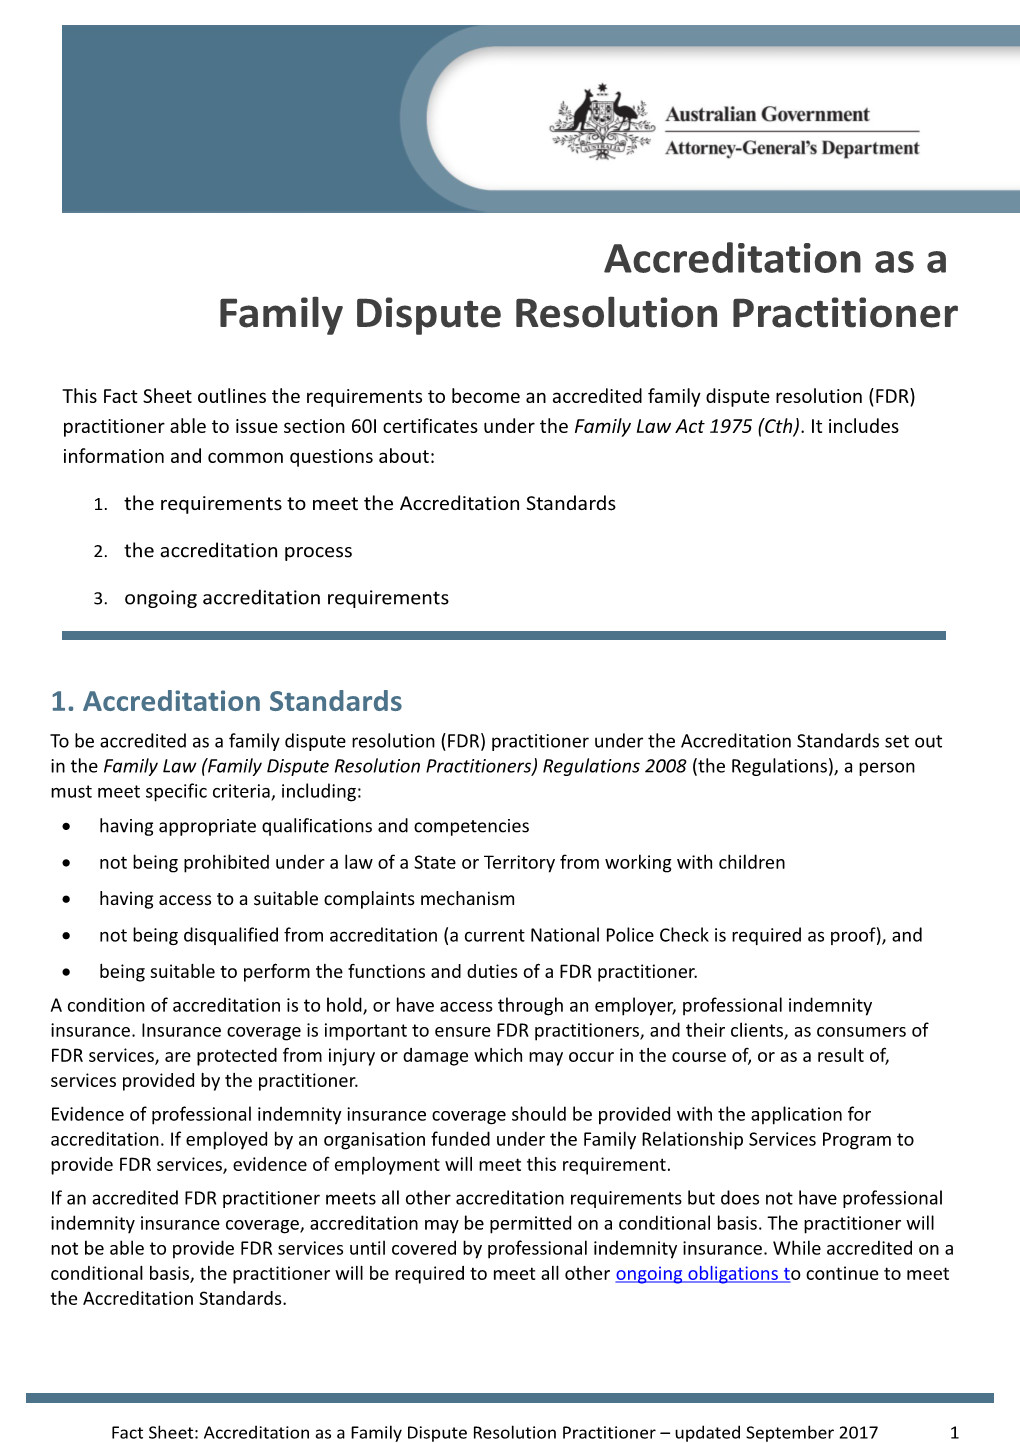 Fact Sheet Accreditation As a Family Dispute Resolution Practitioner